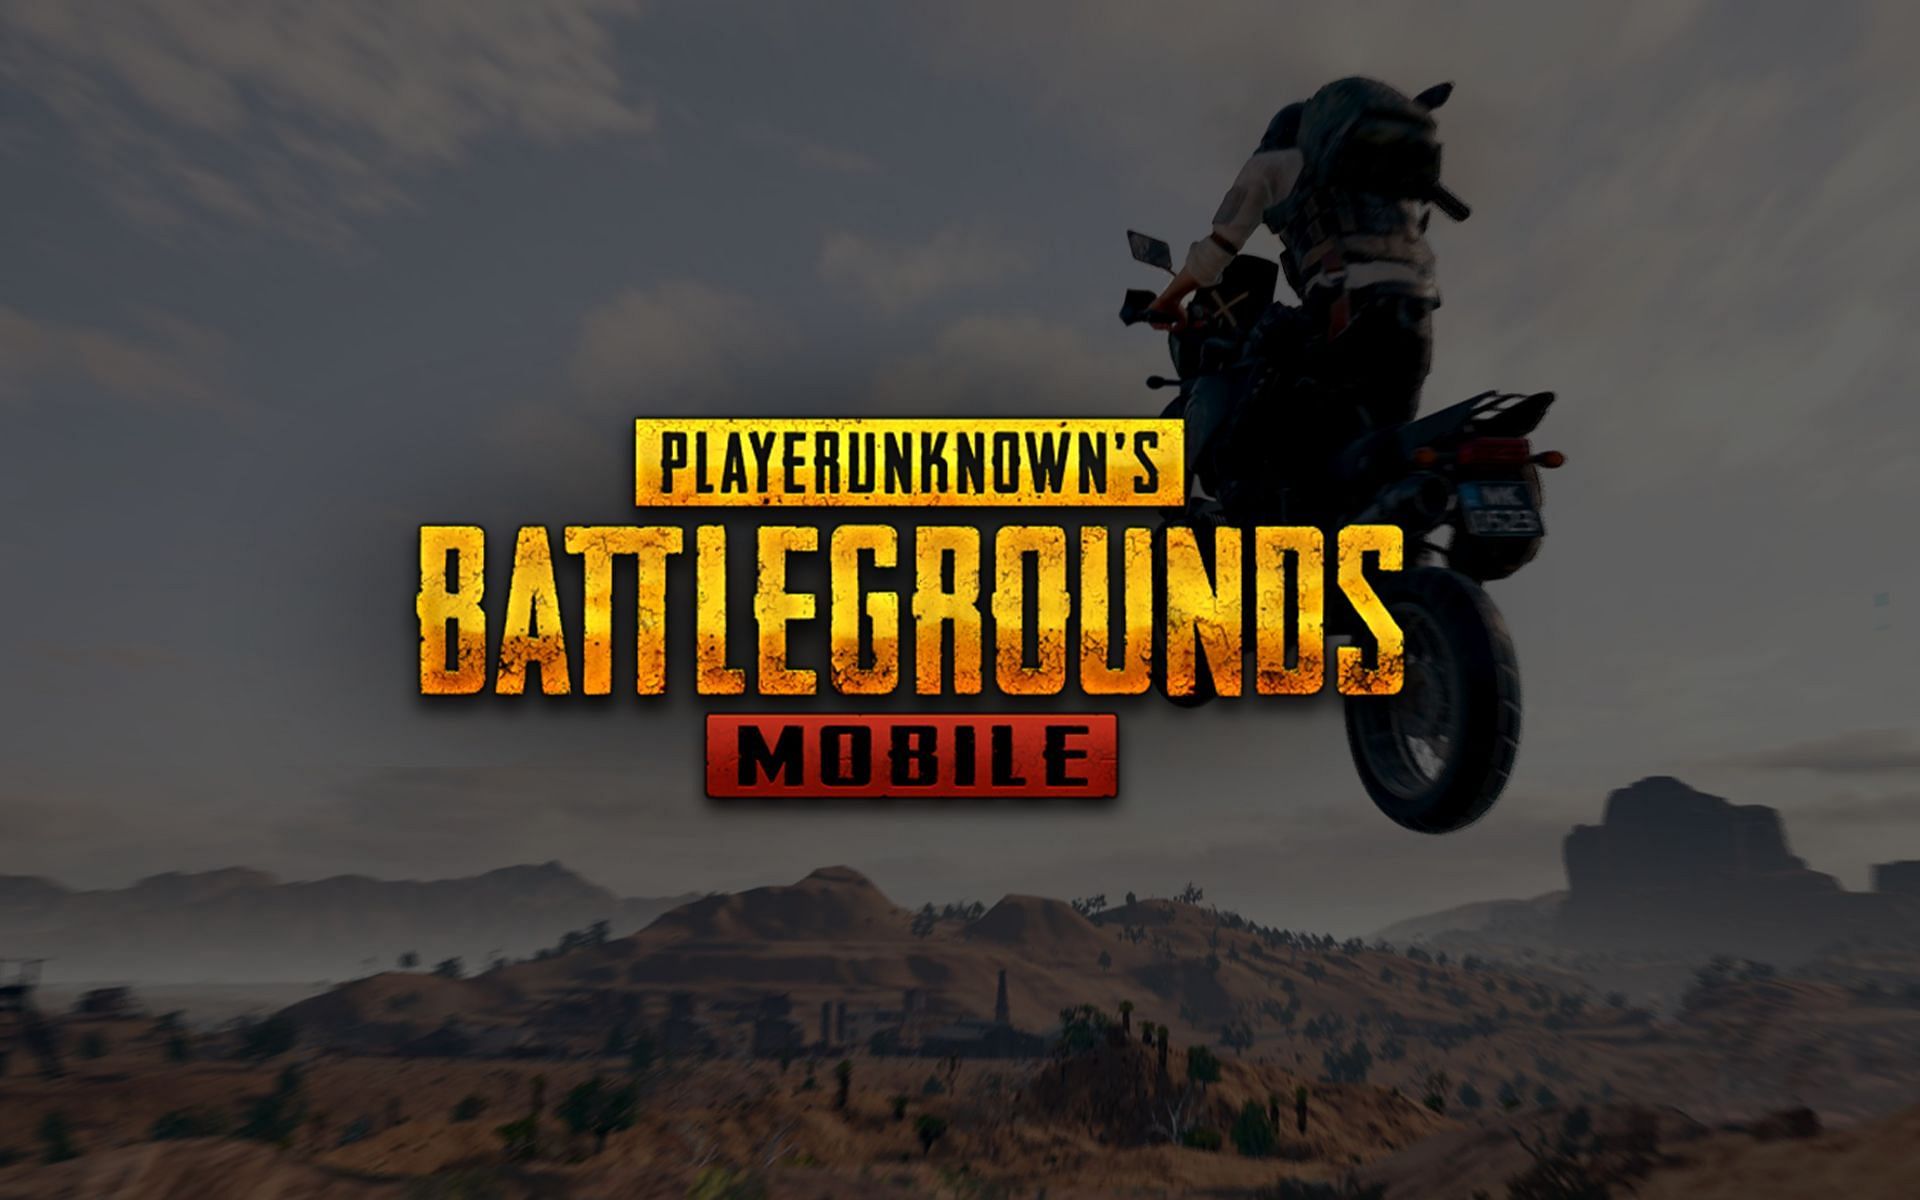 How to download PUBG Mobile 1.8 update APK file on low-end Android devices